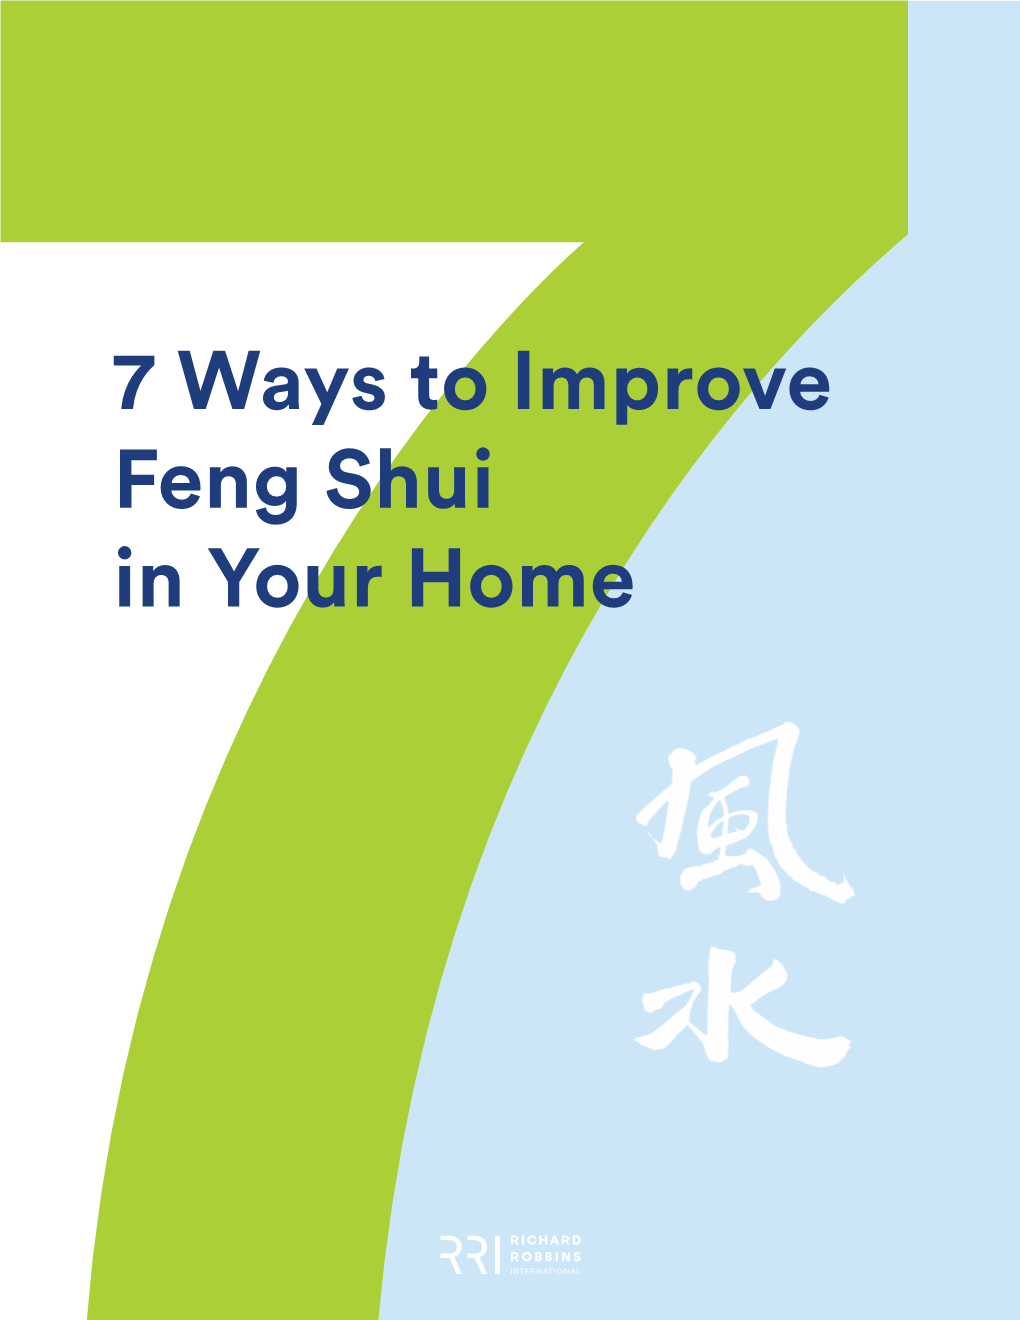 7 Ways to Improve Feng Shui in Your Home